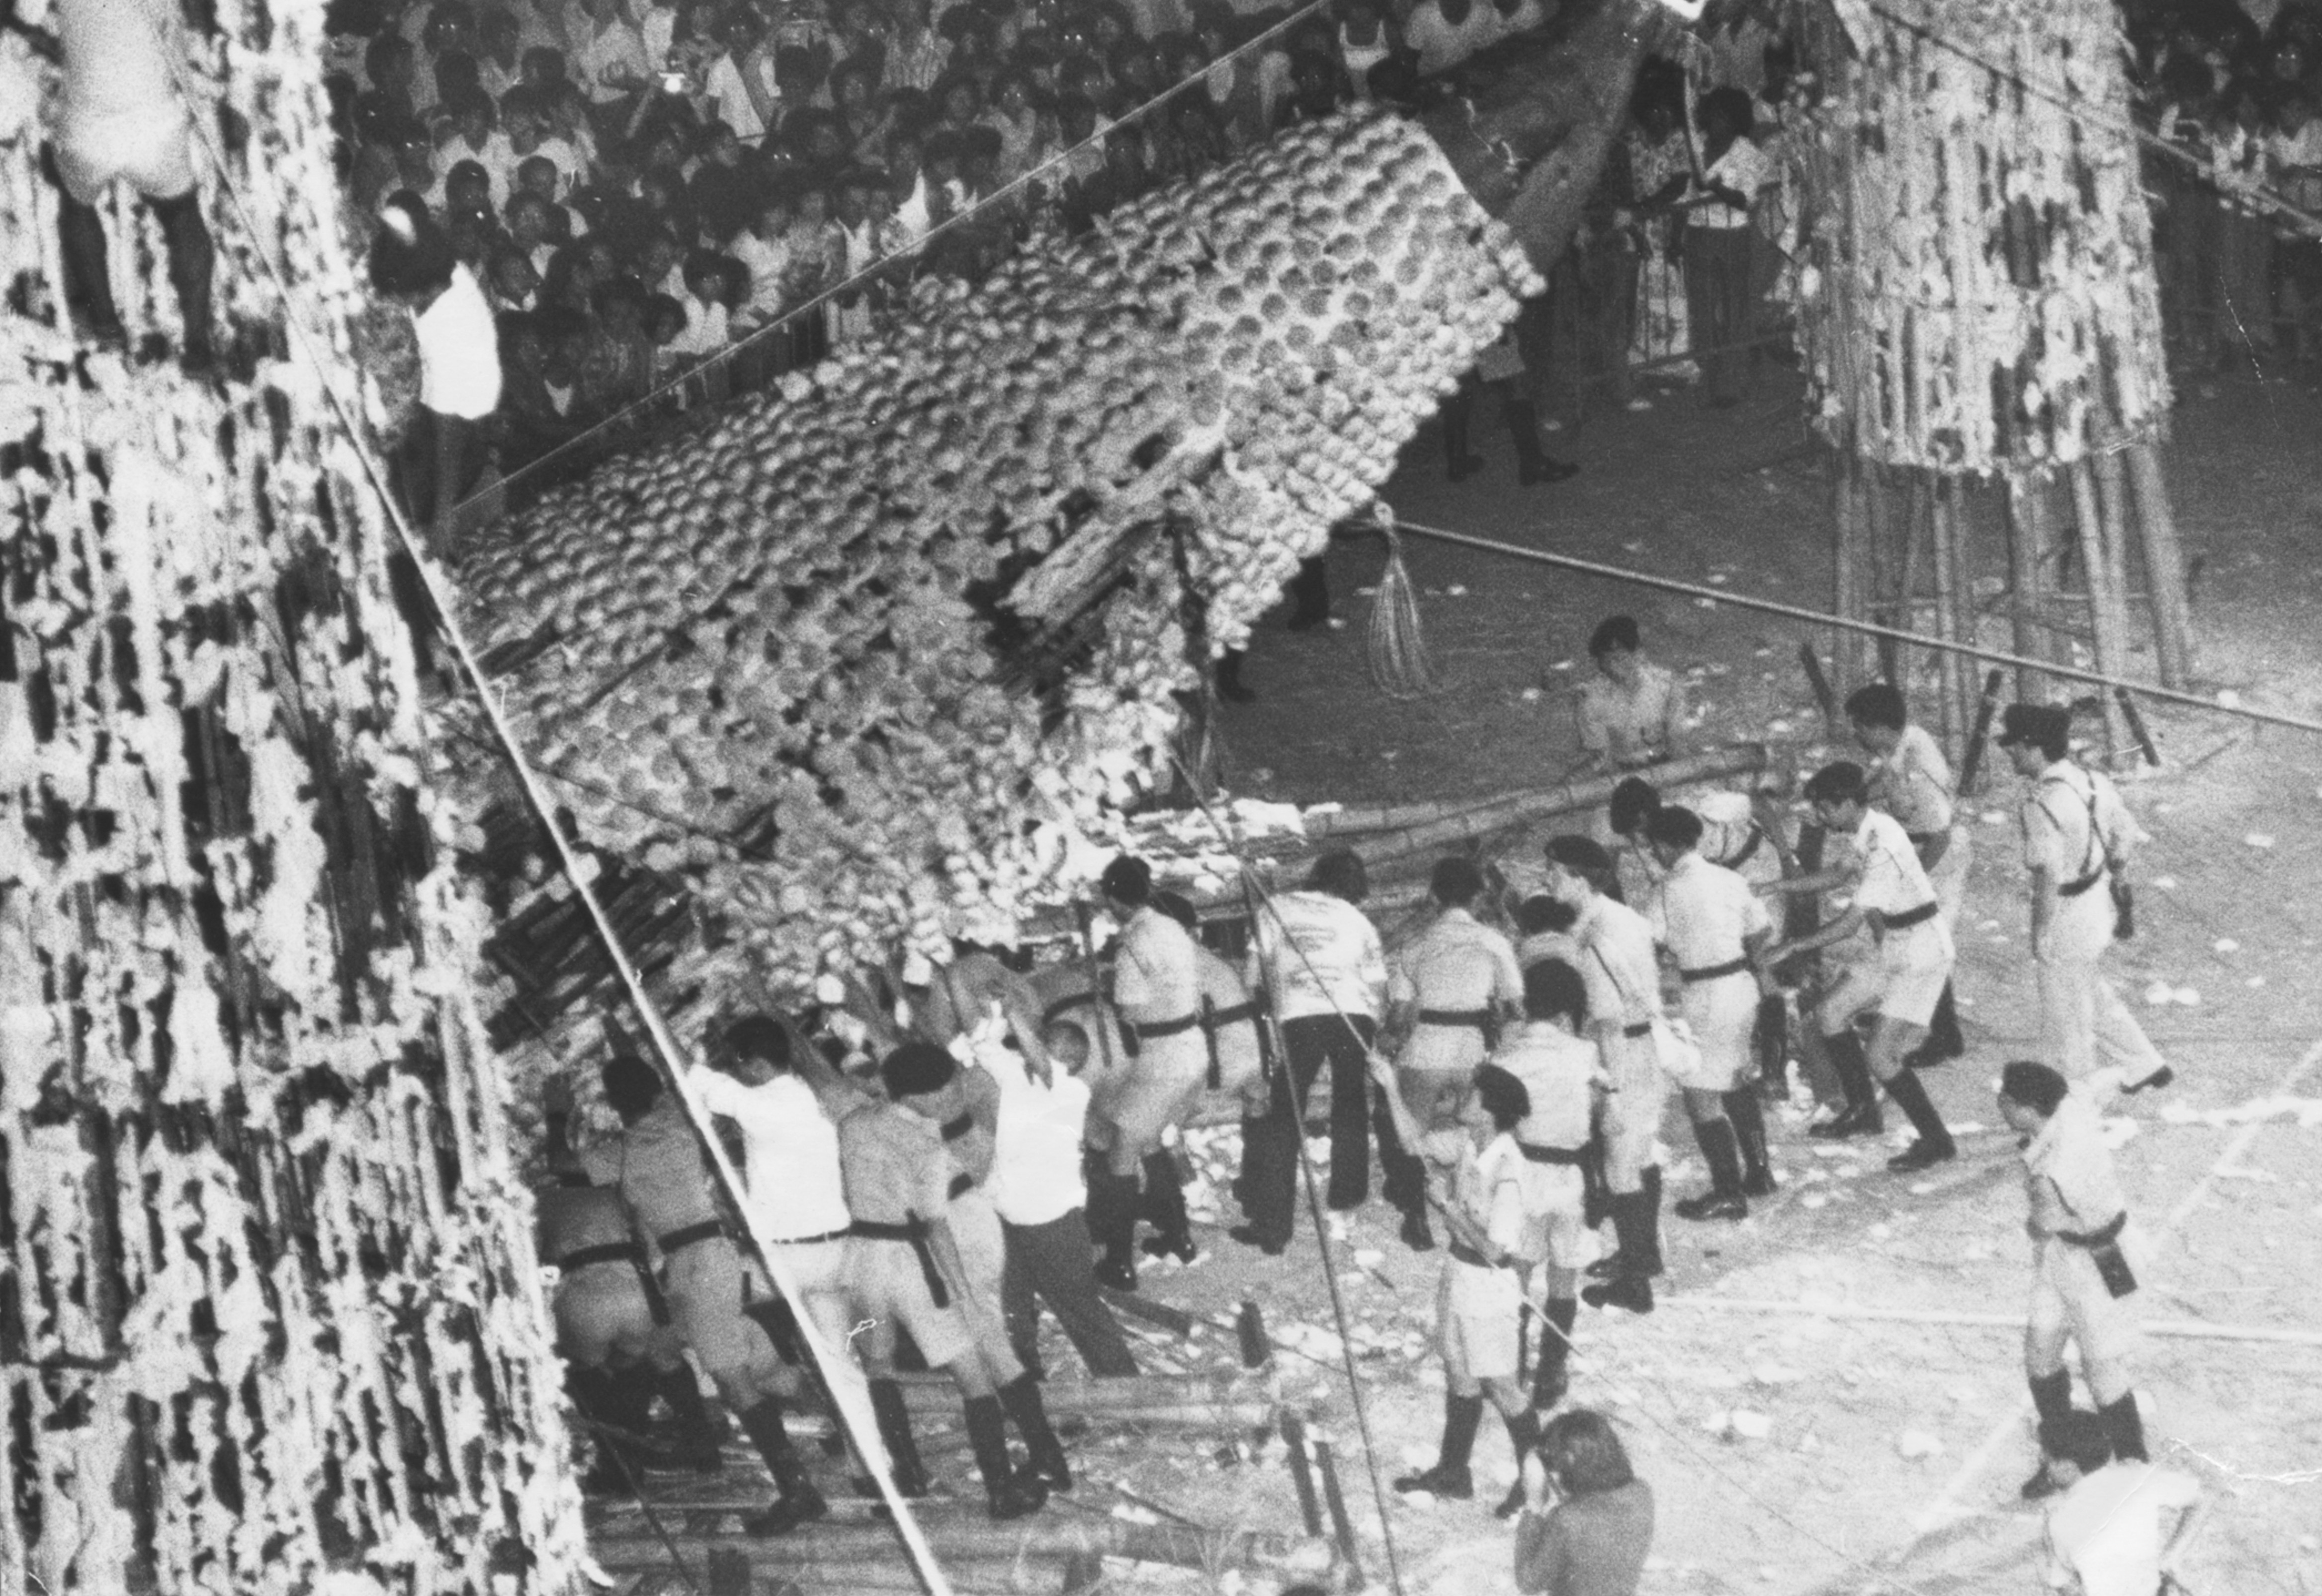 The bun tower fell and hurted more than 100 people 27 years ago on a Cheung Chau Bun Festival day of May 1978, that ended the annual tradition until this year.